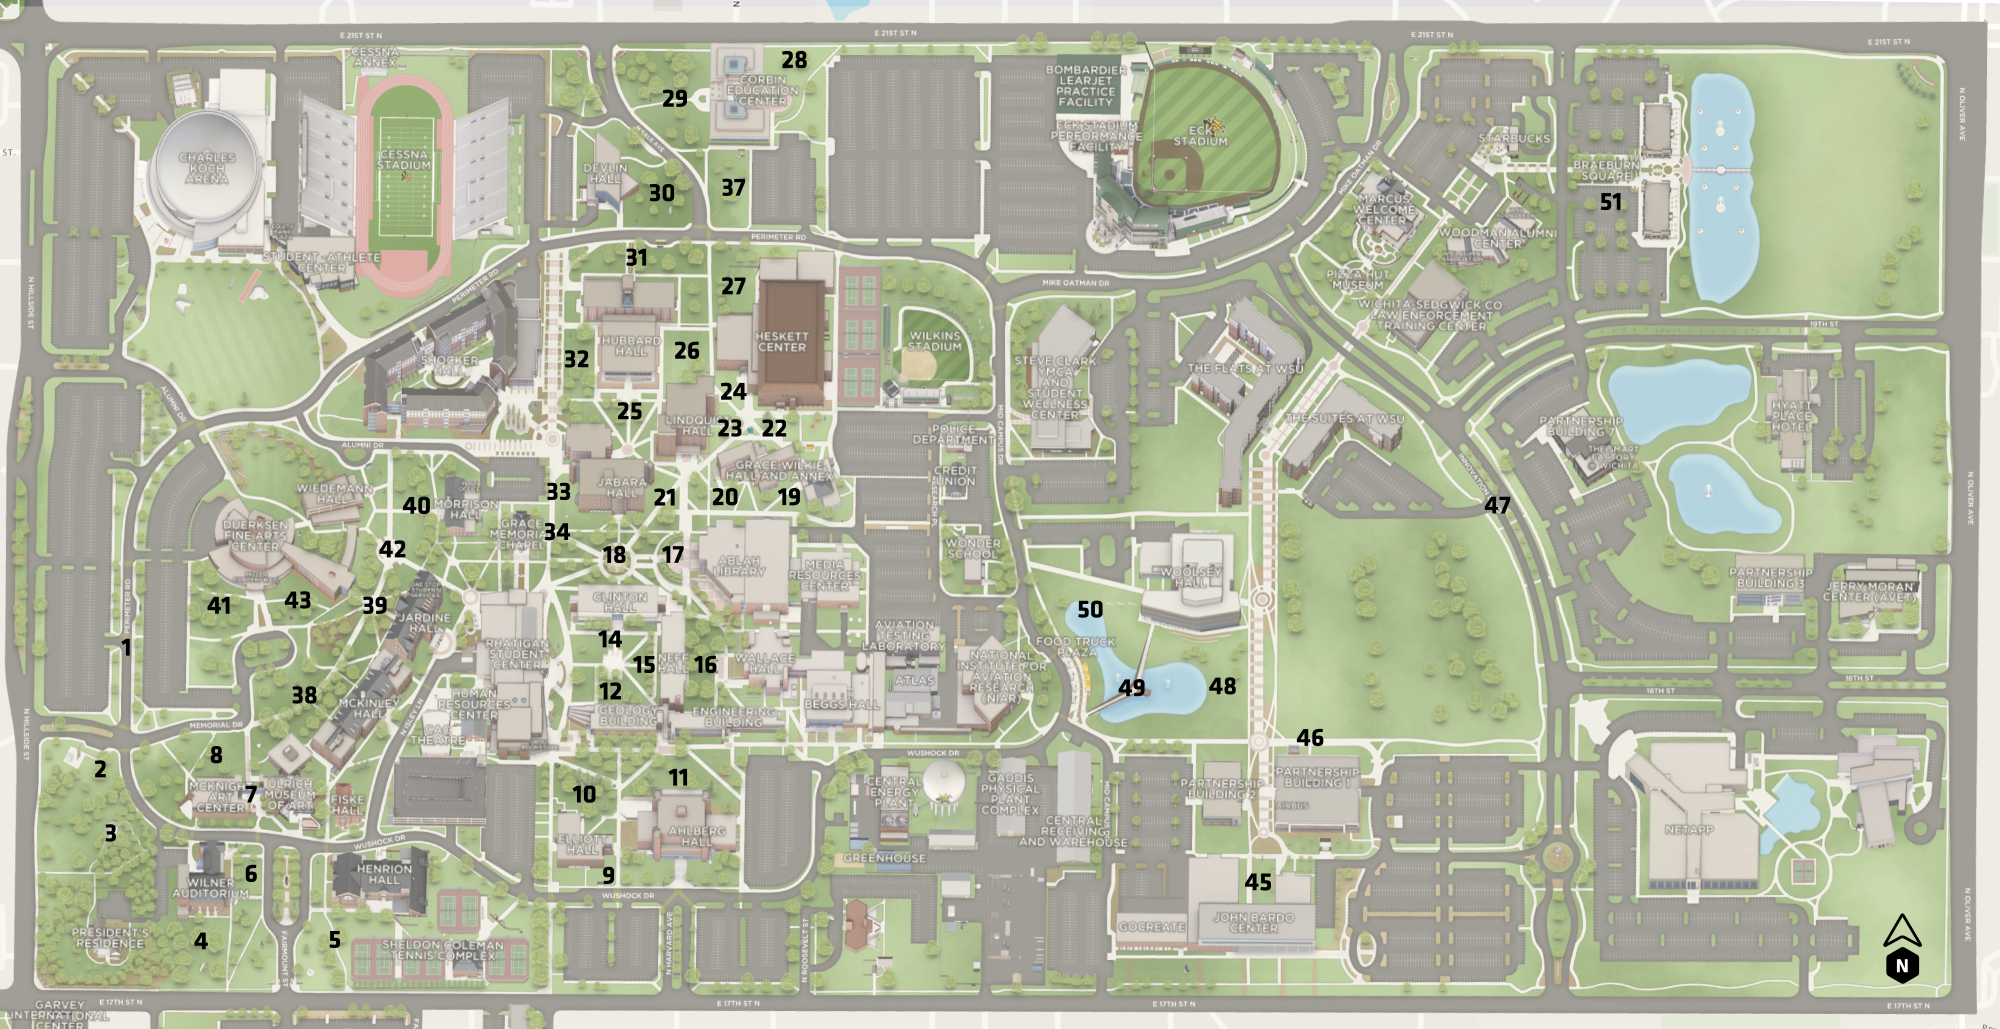 Campus map with outdoor spaces numbered